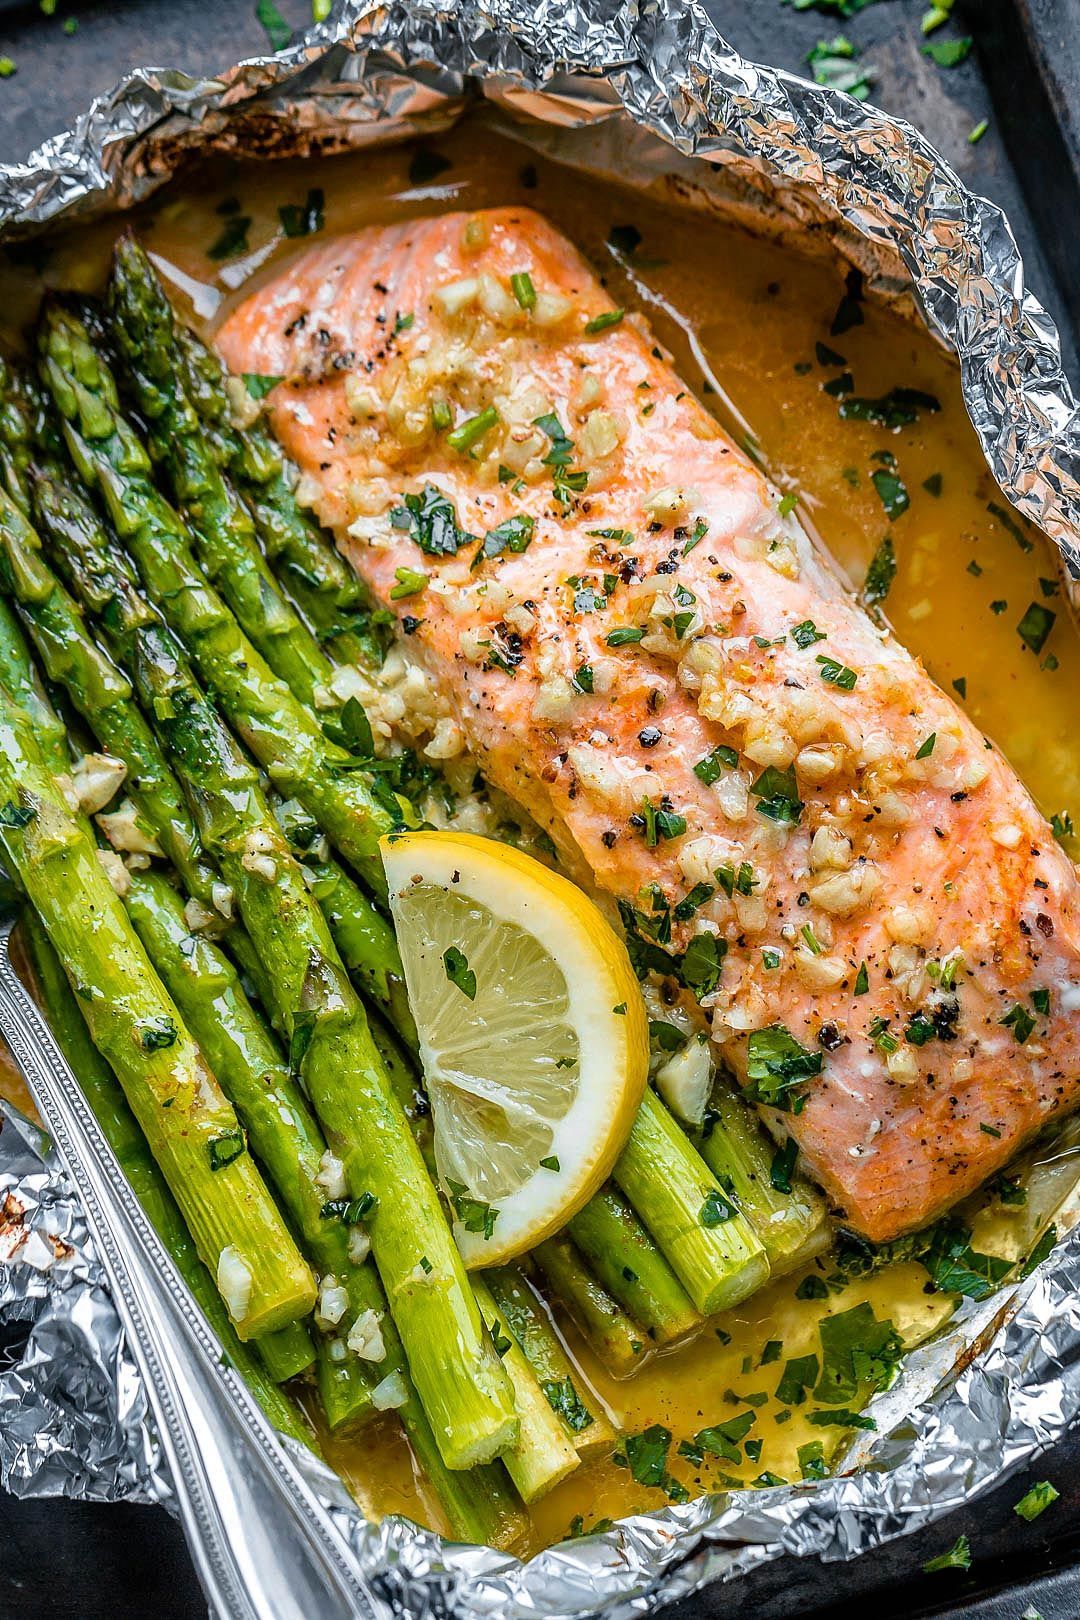 Salmon and Asparagus Foil Packs with Garlic Lemon Butter Sauce -   14 healthy recipes Salmon dishes ideas